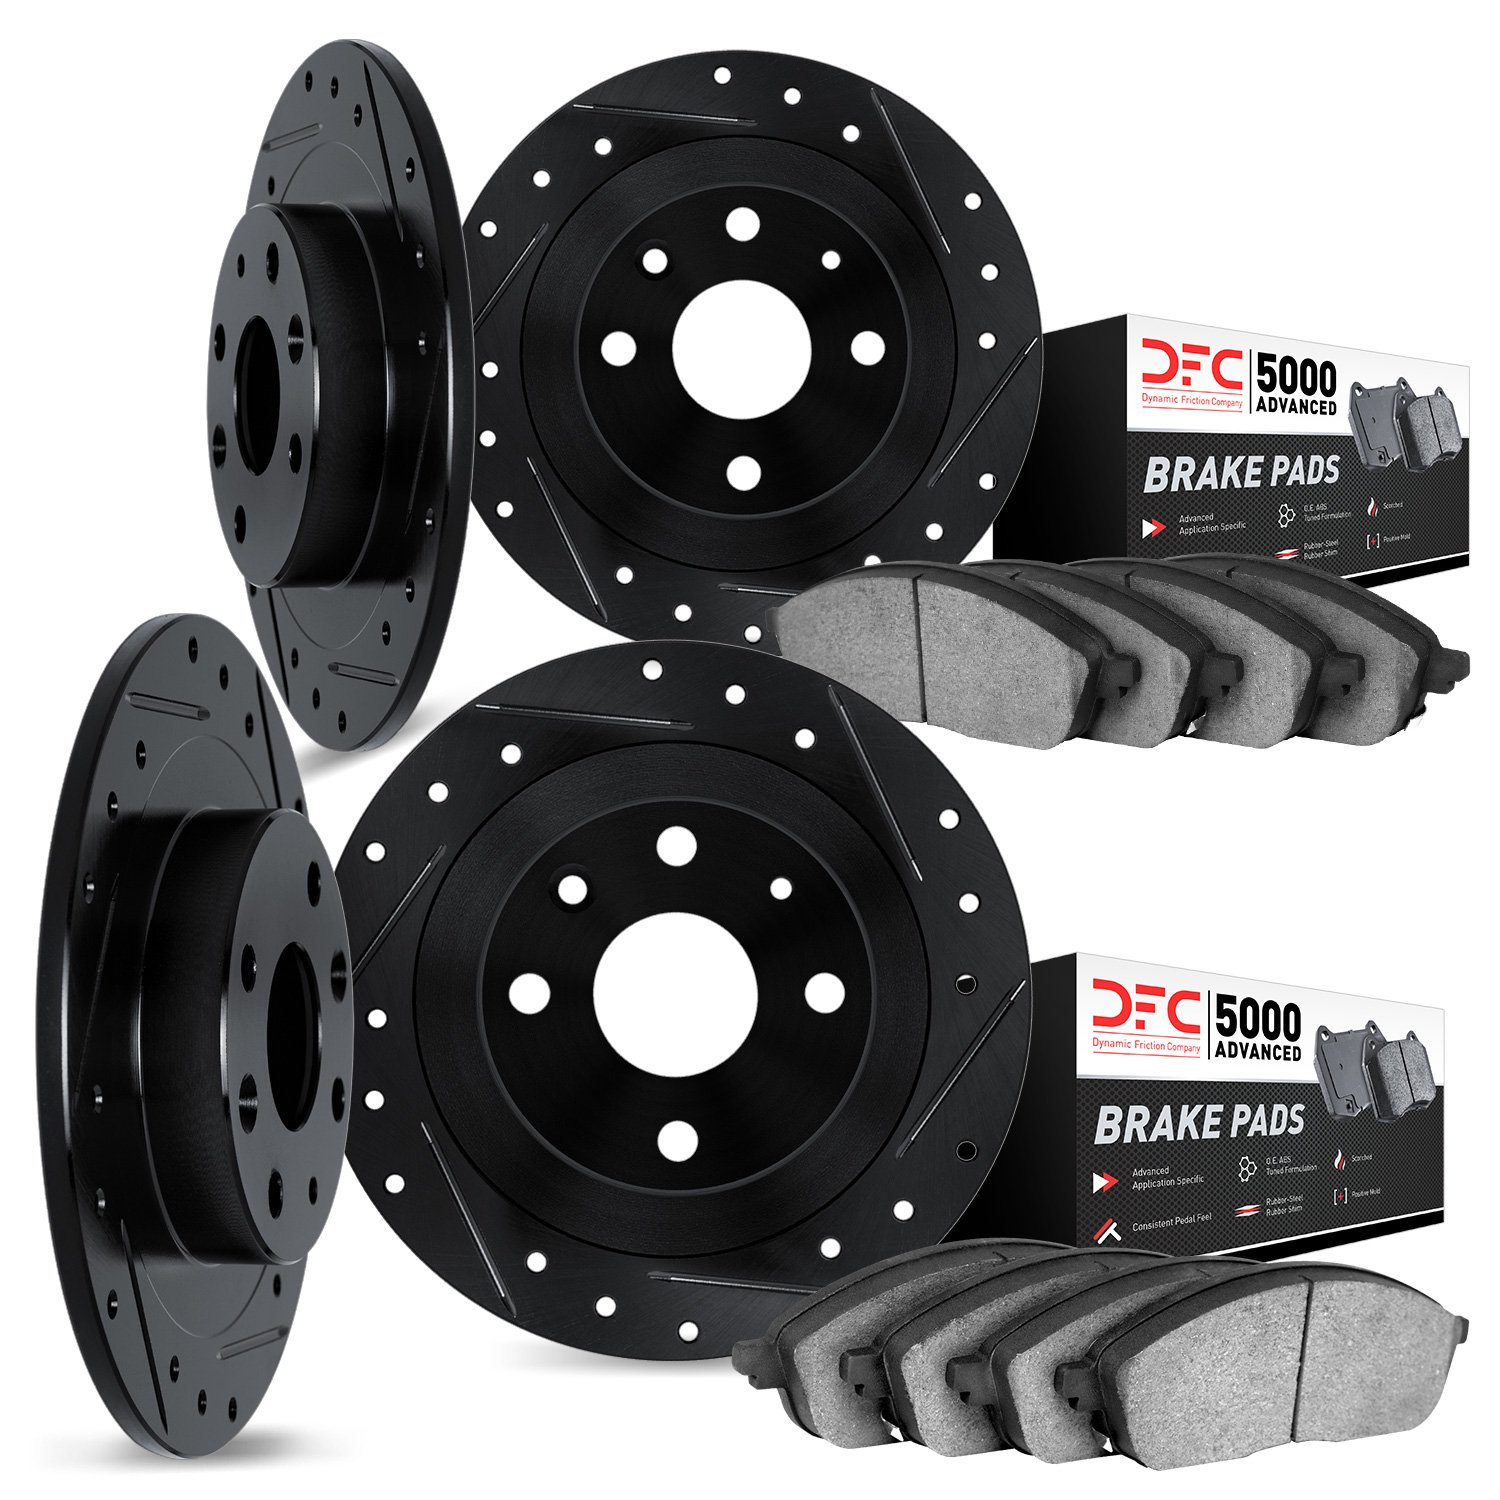 8504-28002 Drilled/Slotted Brake Rotors w/5000 Advanced Brake Pads Kit [Black], 1980-1989 Peugeot, Position: Front and Rear